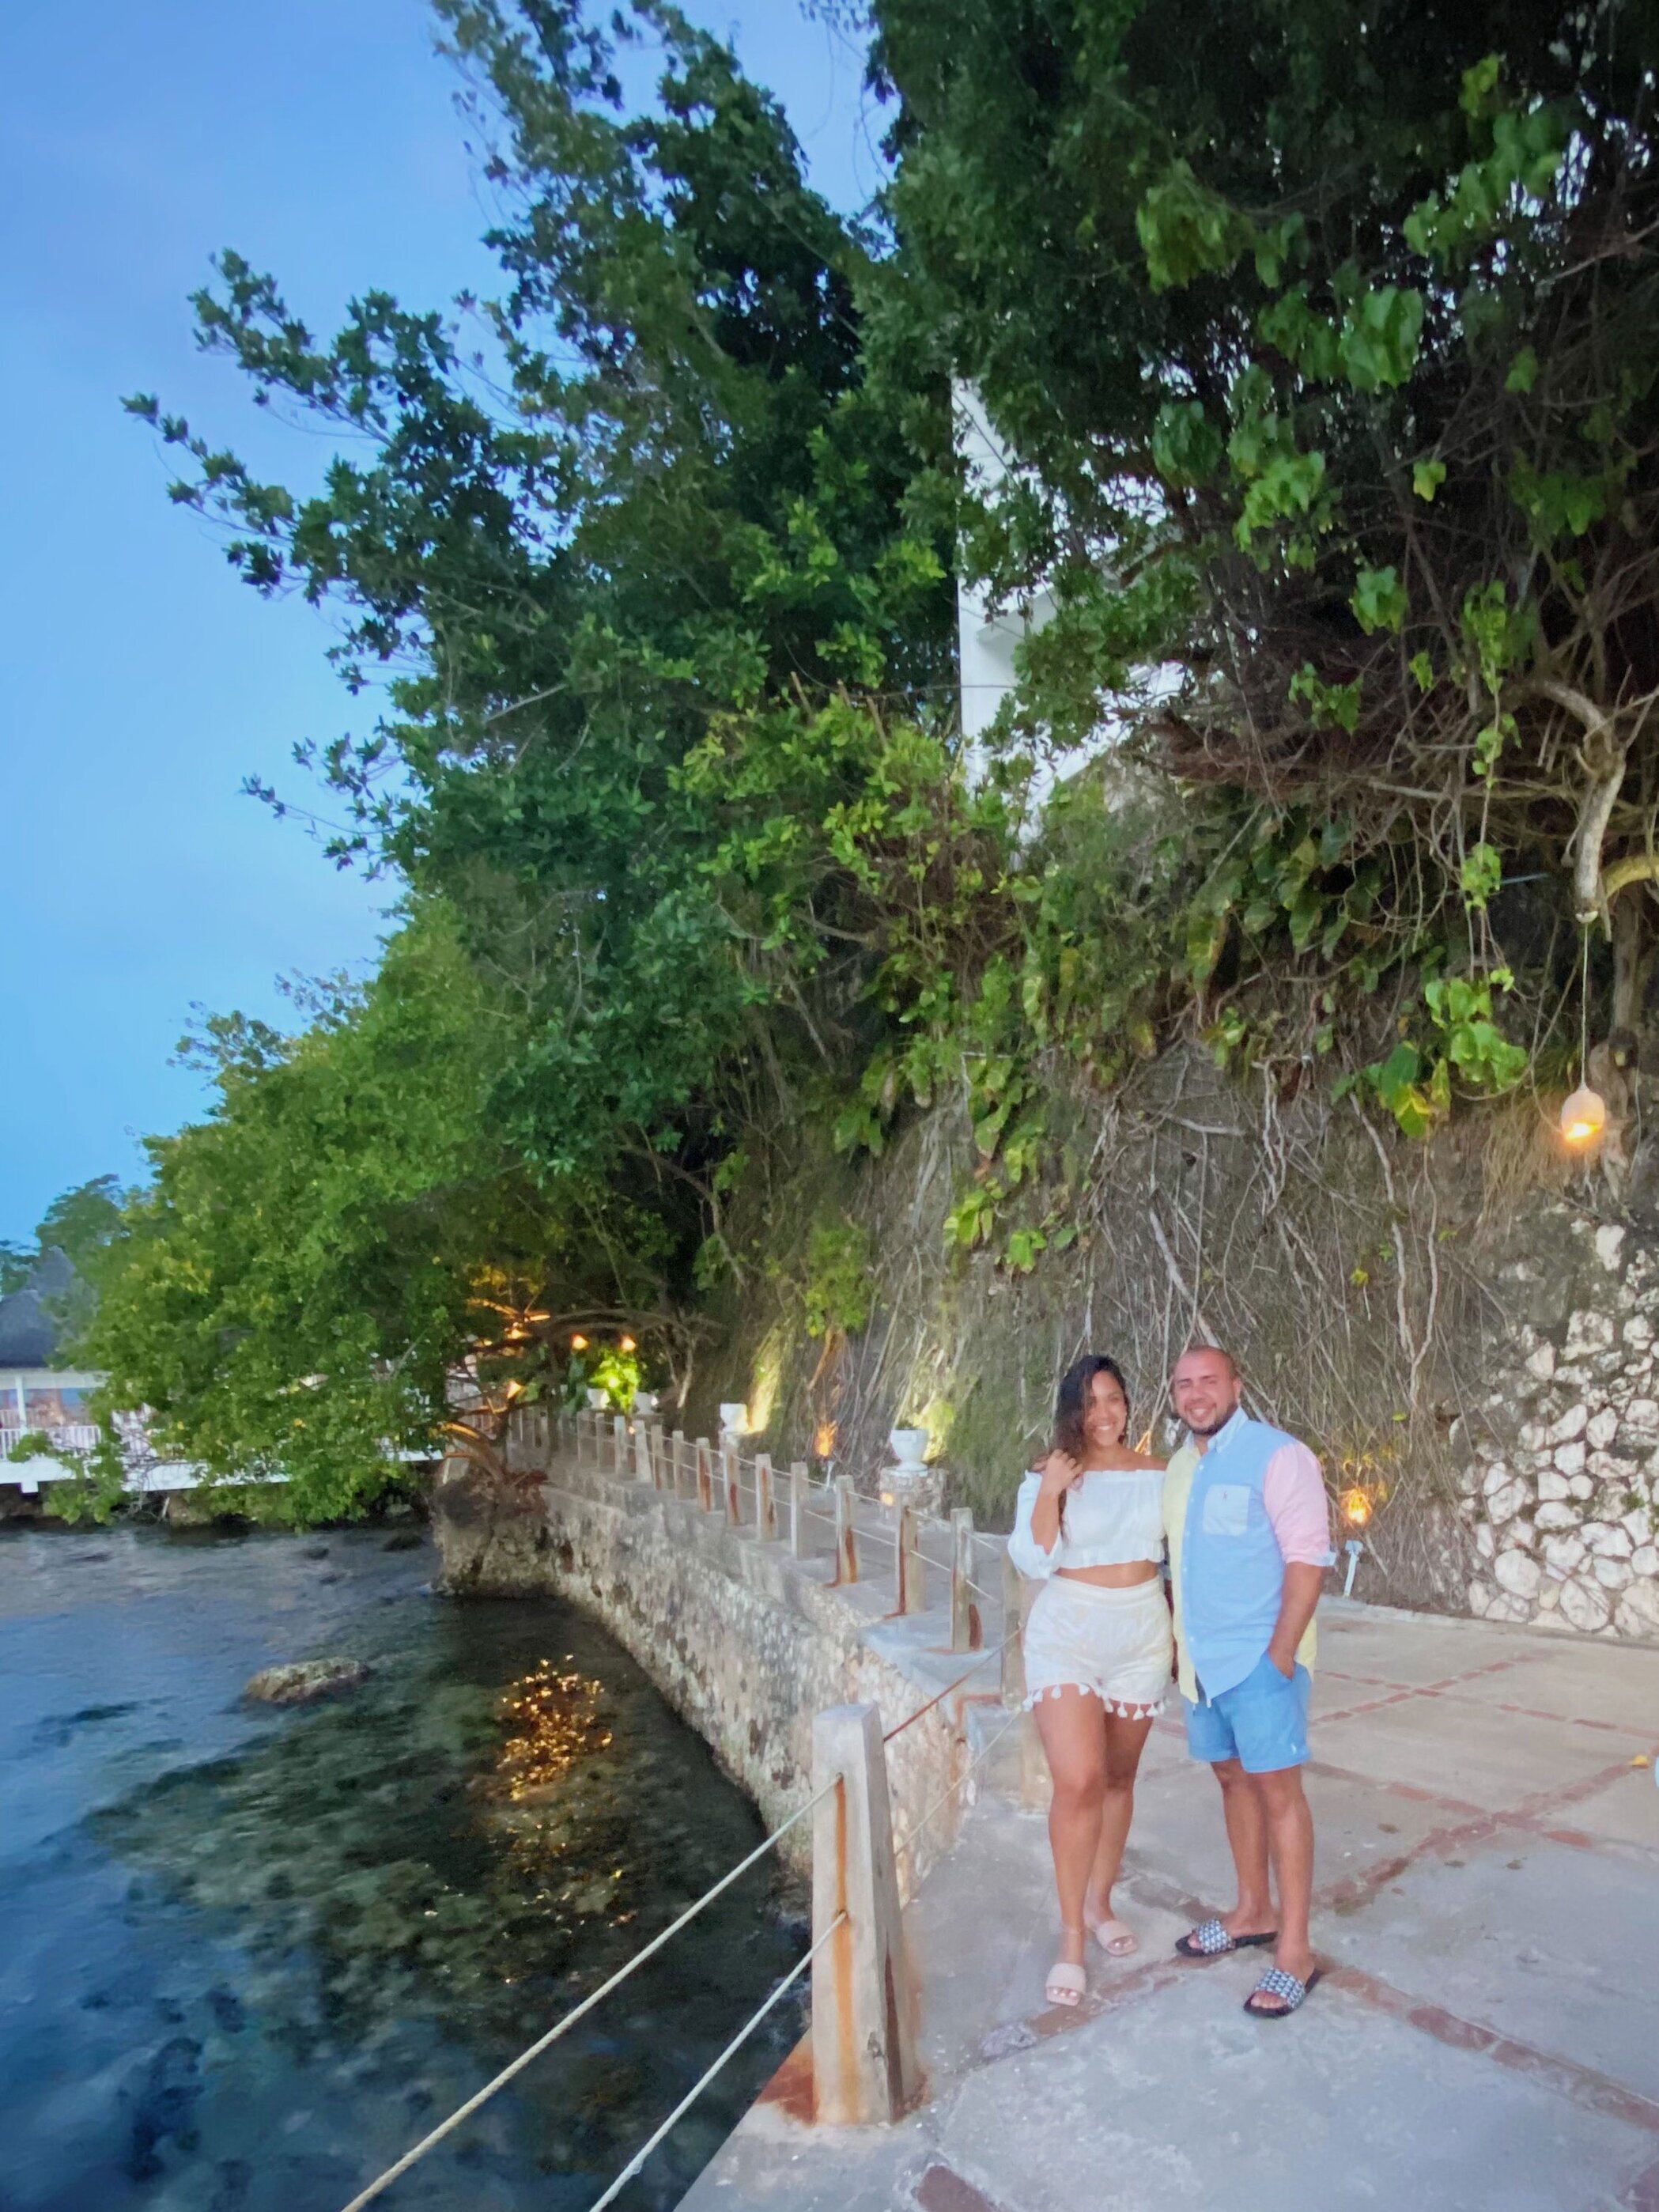 Couples Tower Isle Getaway In Jamaica — Ana Jacqueline pic